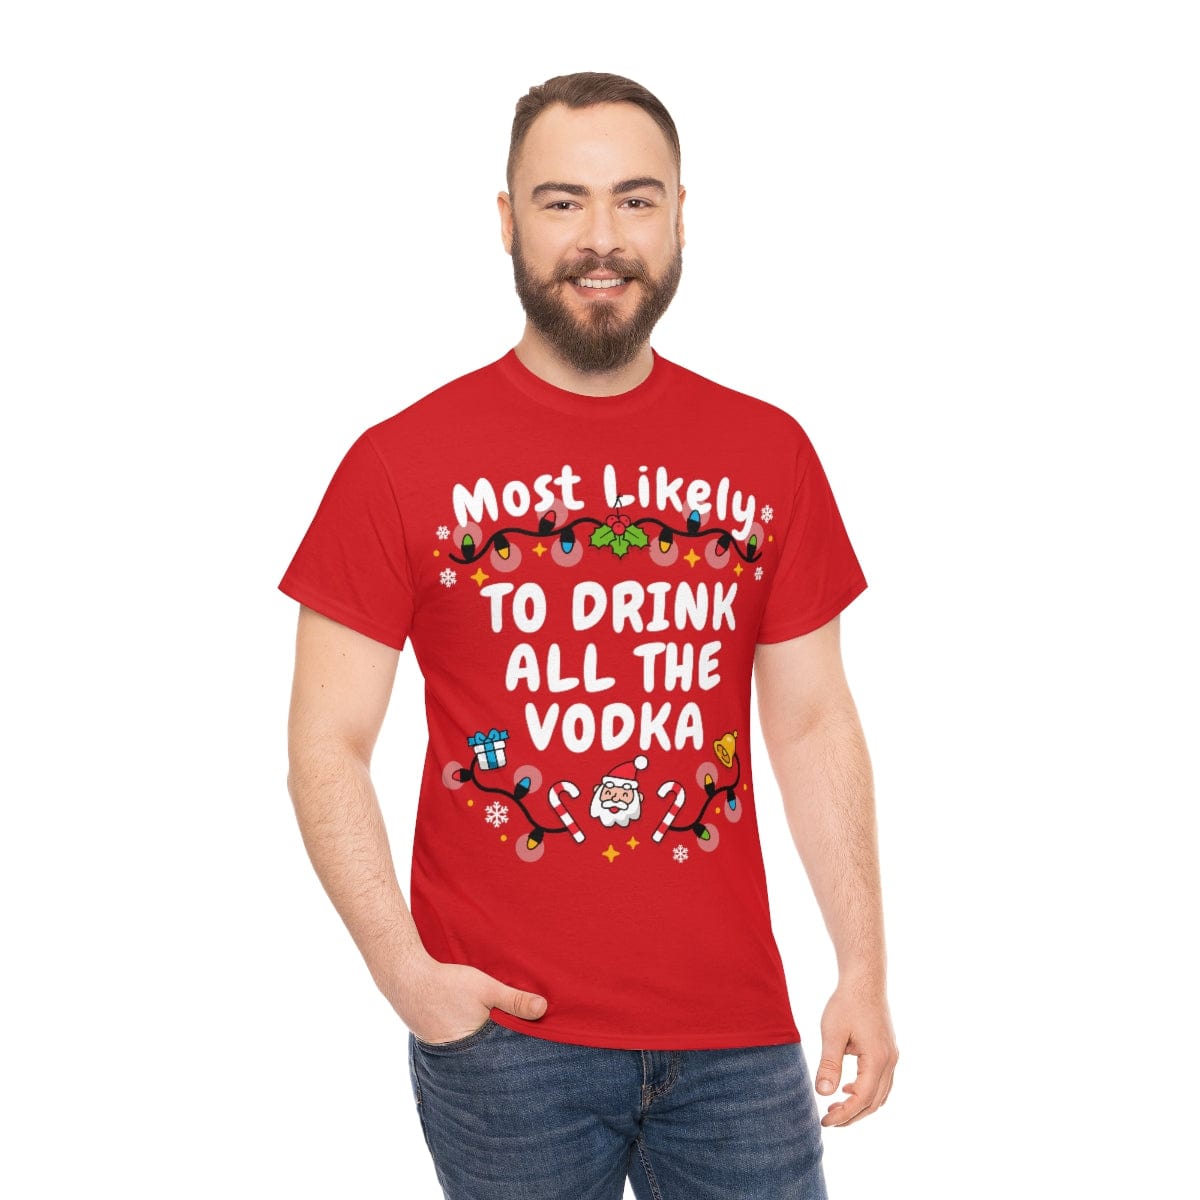 TO DRINK ALL THE VODKA